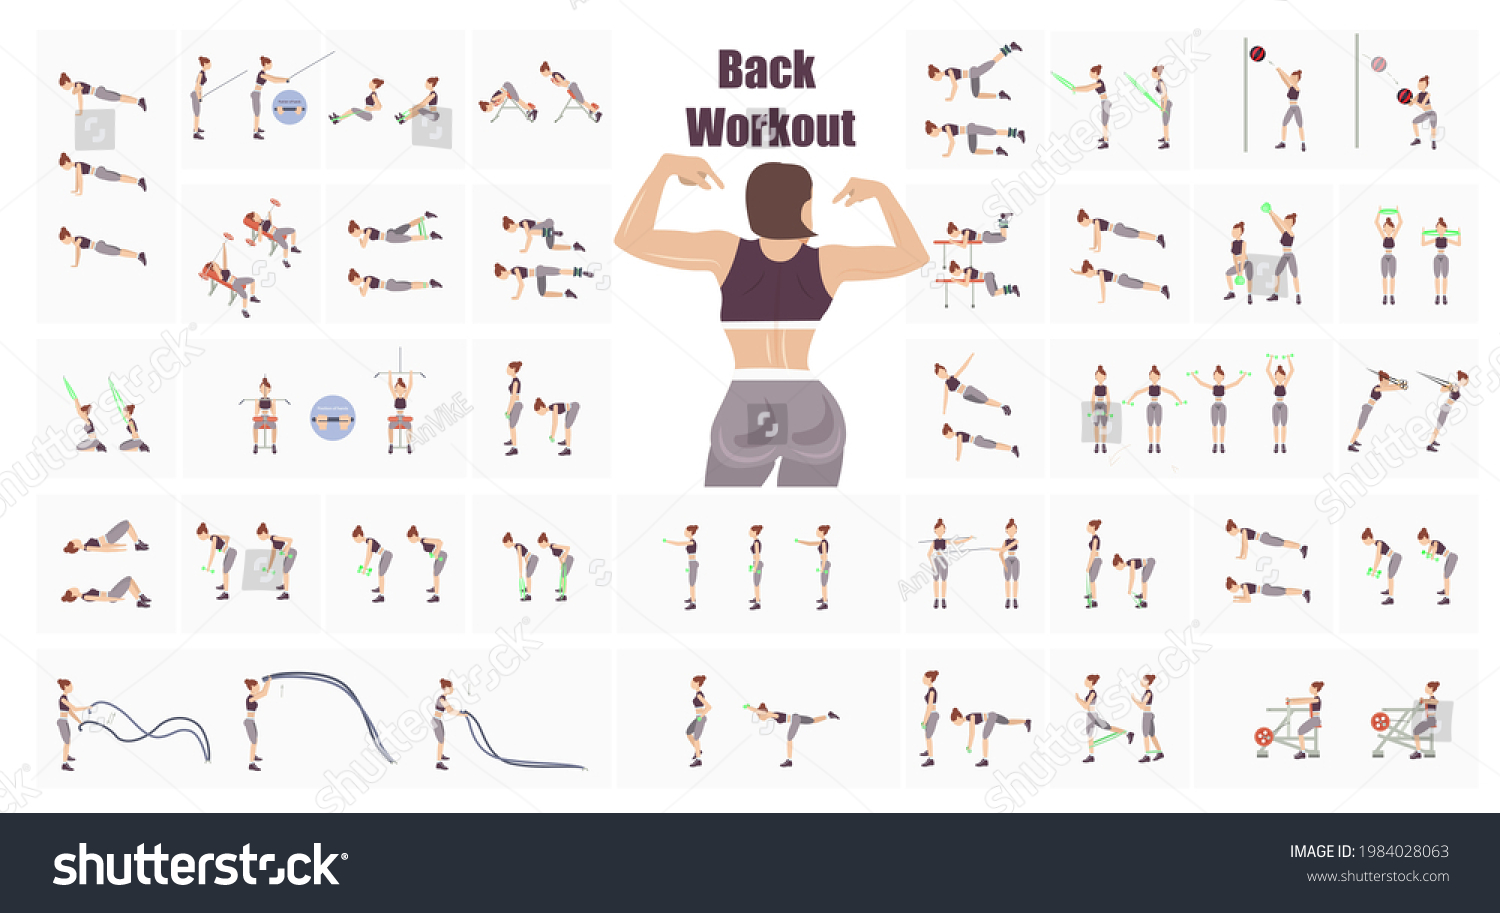 SVG of Girl fitness workout.  Fat burning workout. Full body exercises. Back exercises. Training with inventory. Toned body. Woman's back before and after weight loss. Vector illustration. svg